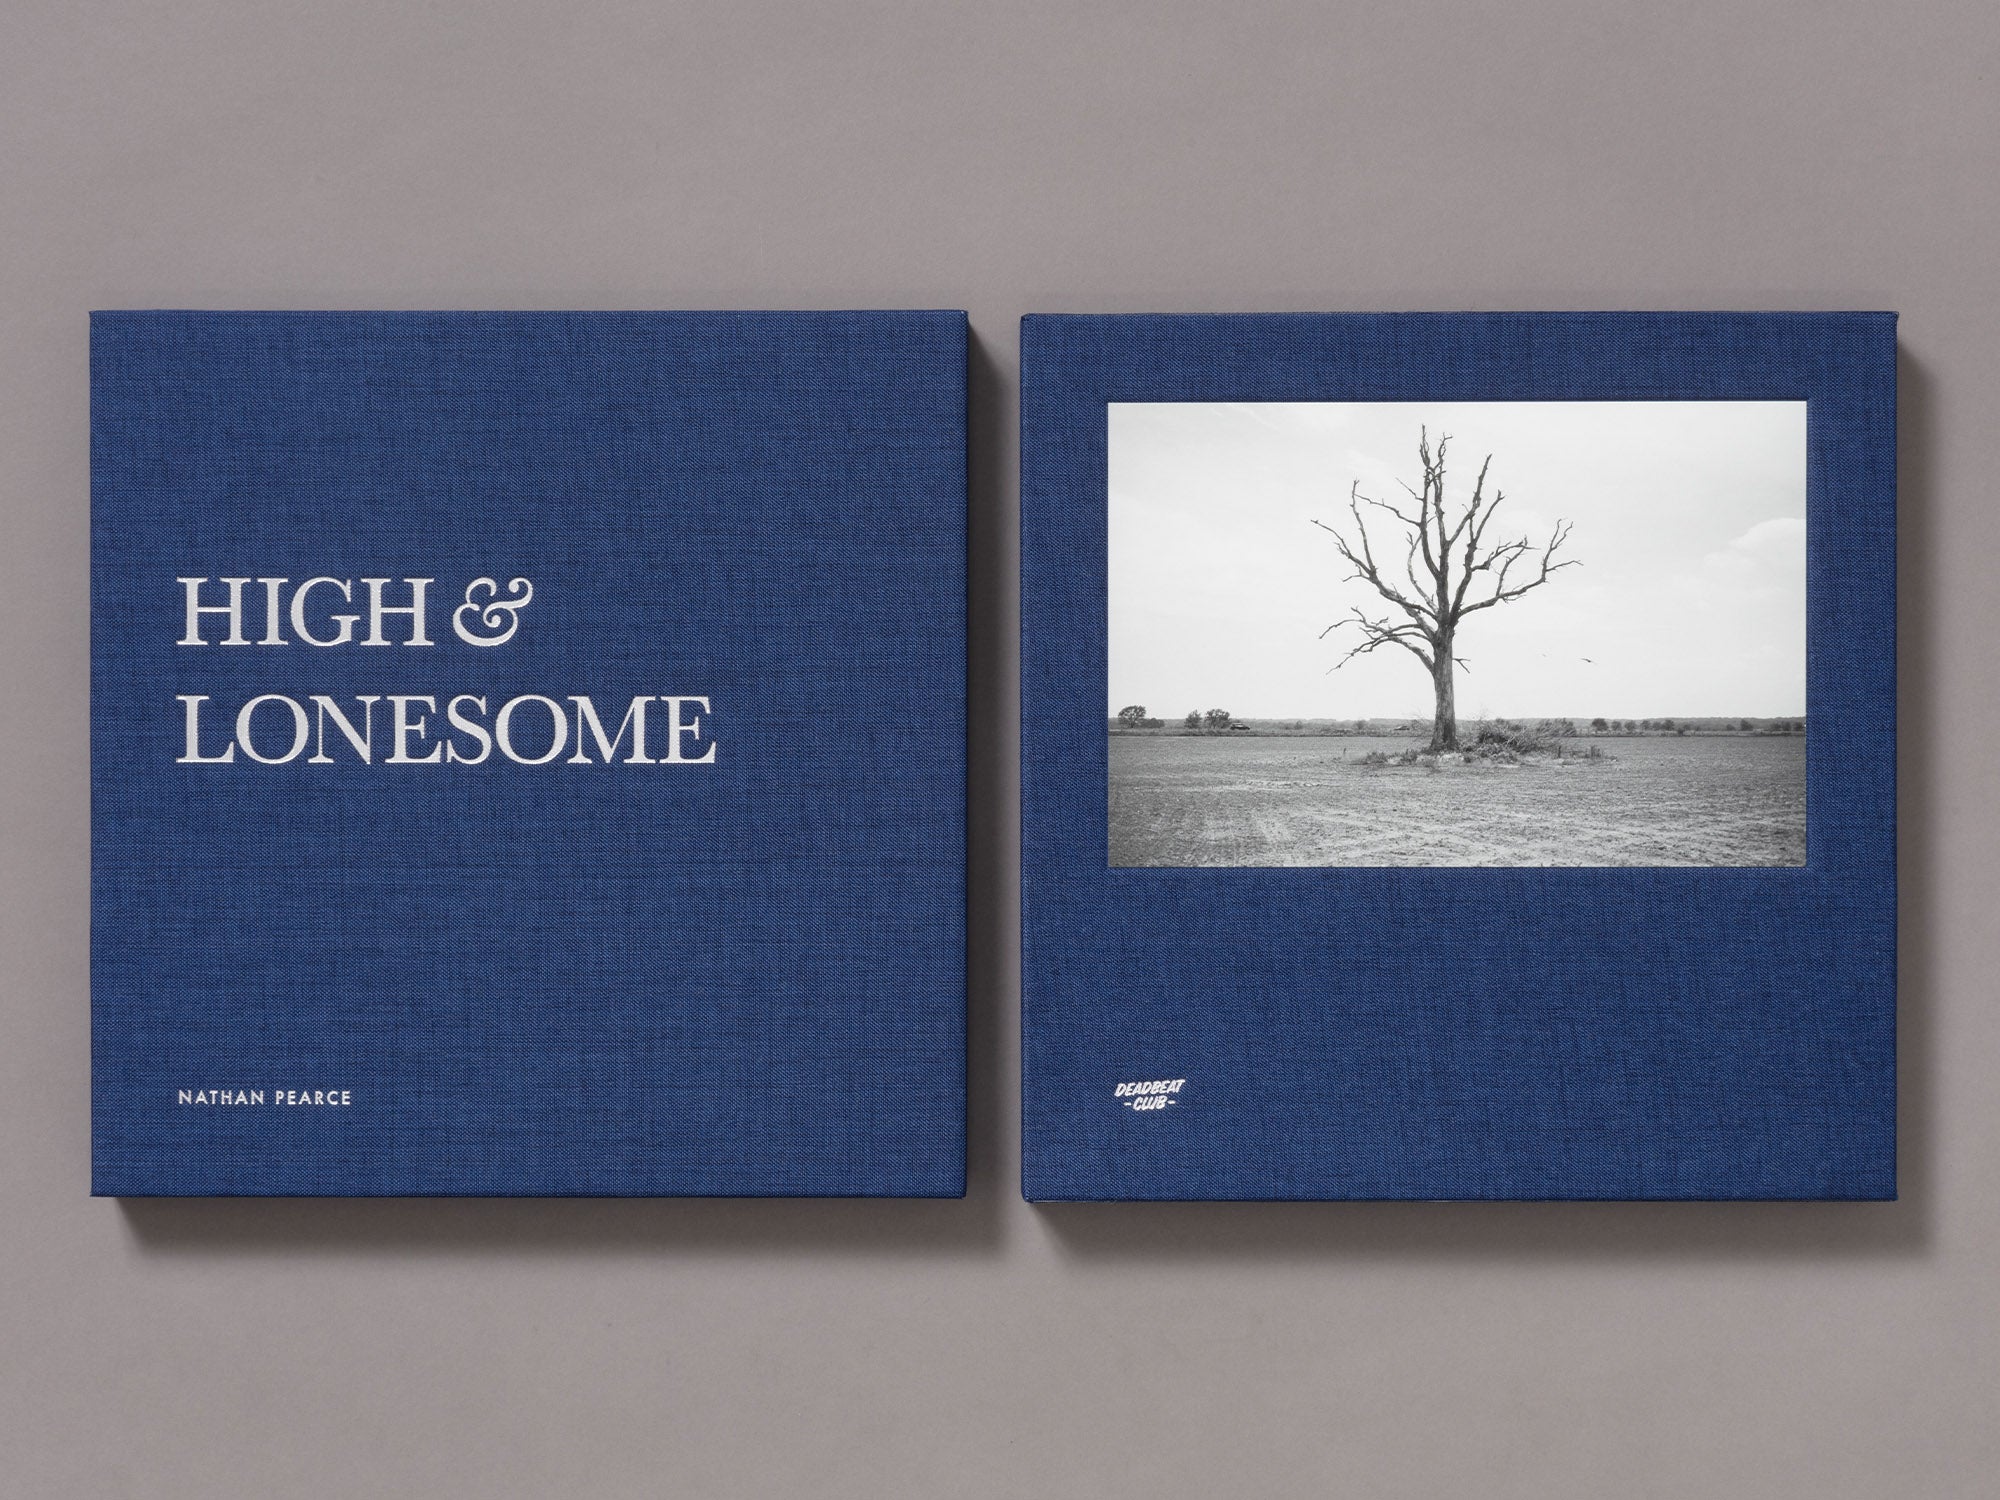 *Special Edition* Nathan Pearce - High & Lonesome